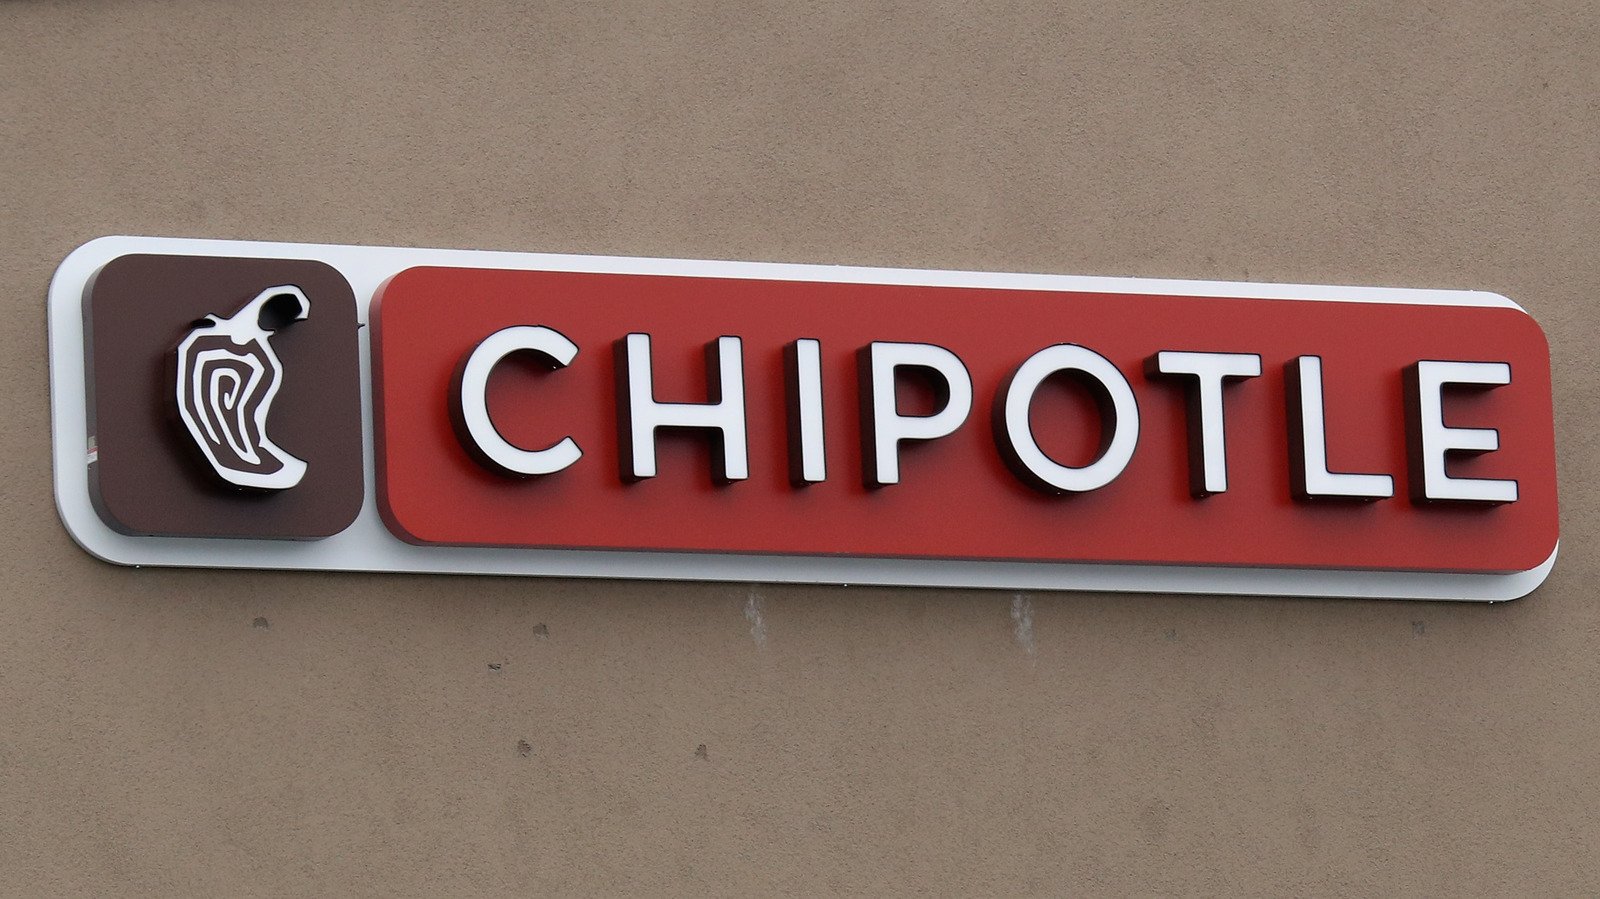 Chipotle Isn't As Good For You As You Think. Here's Why - Mashed